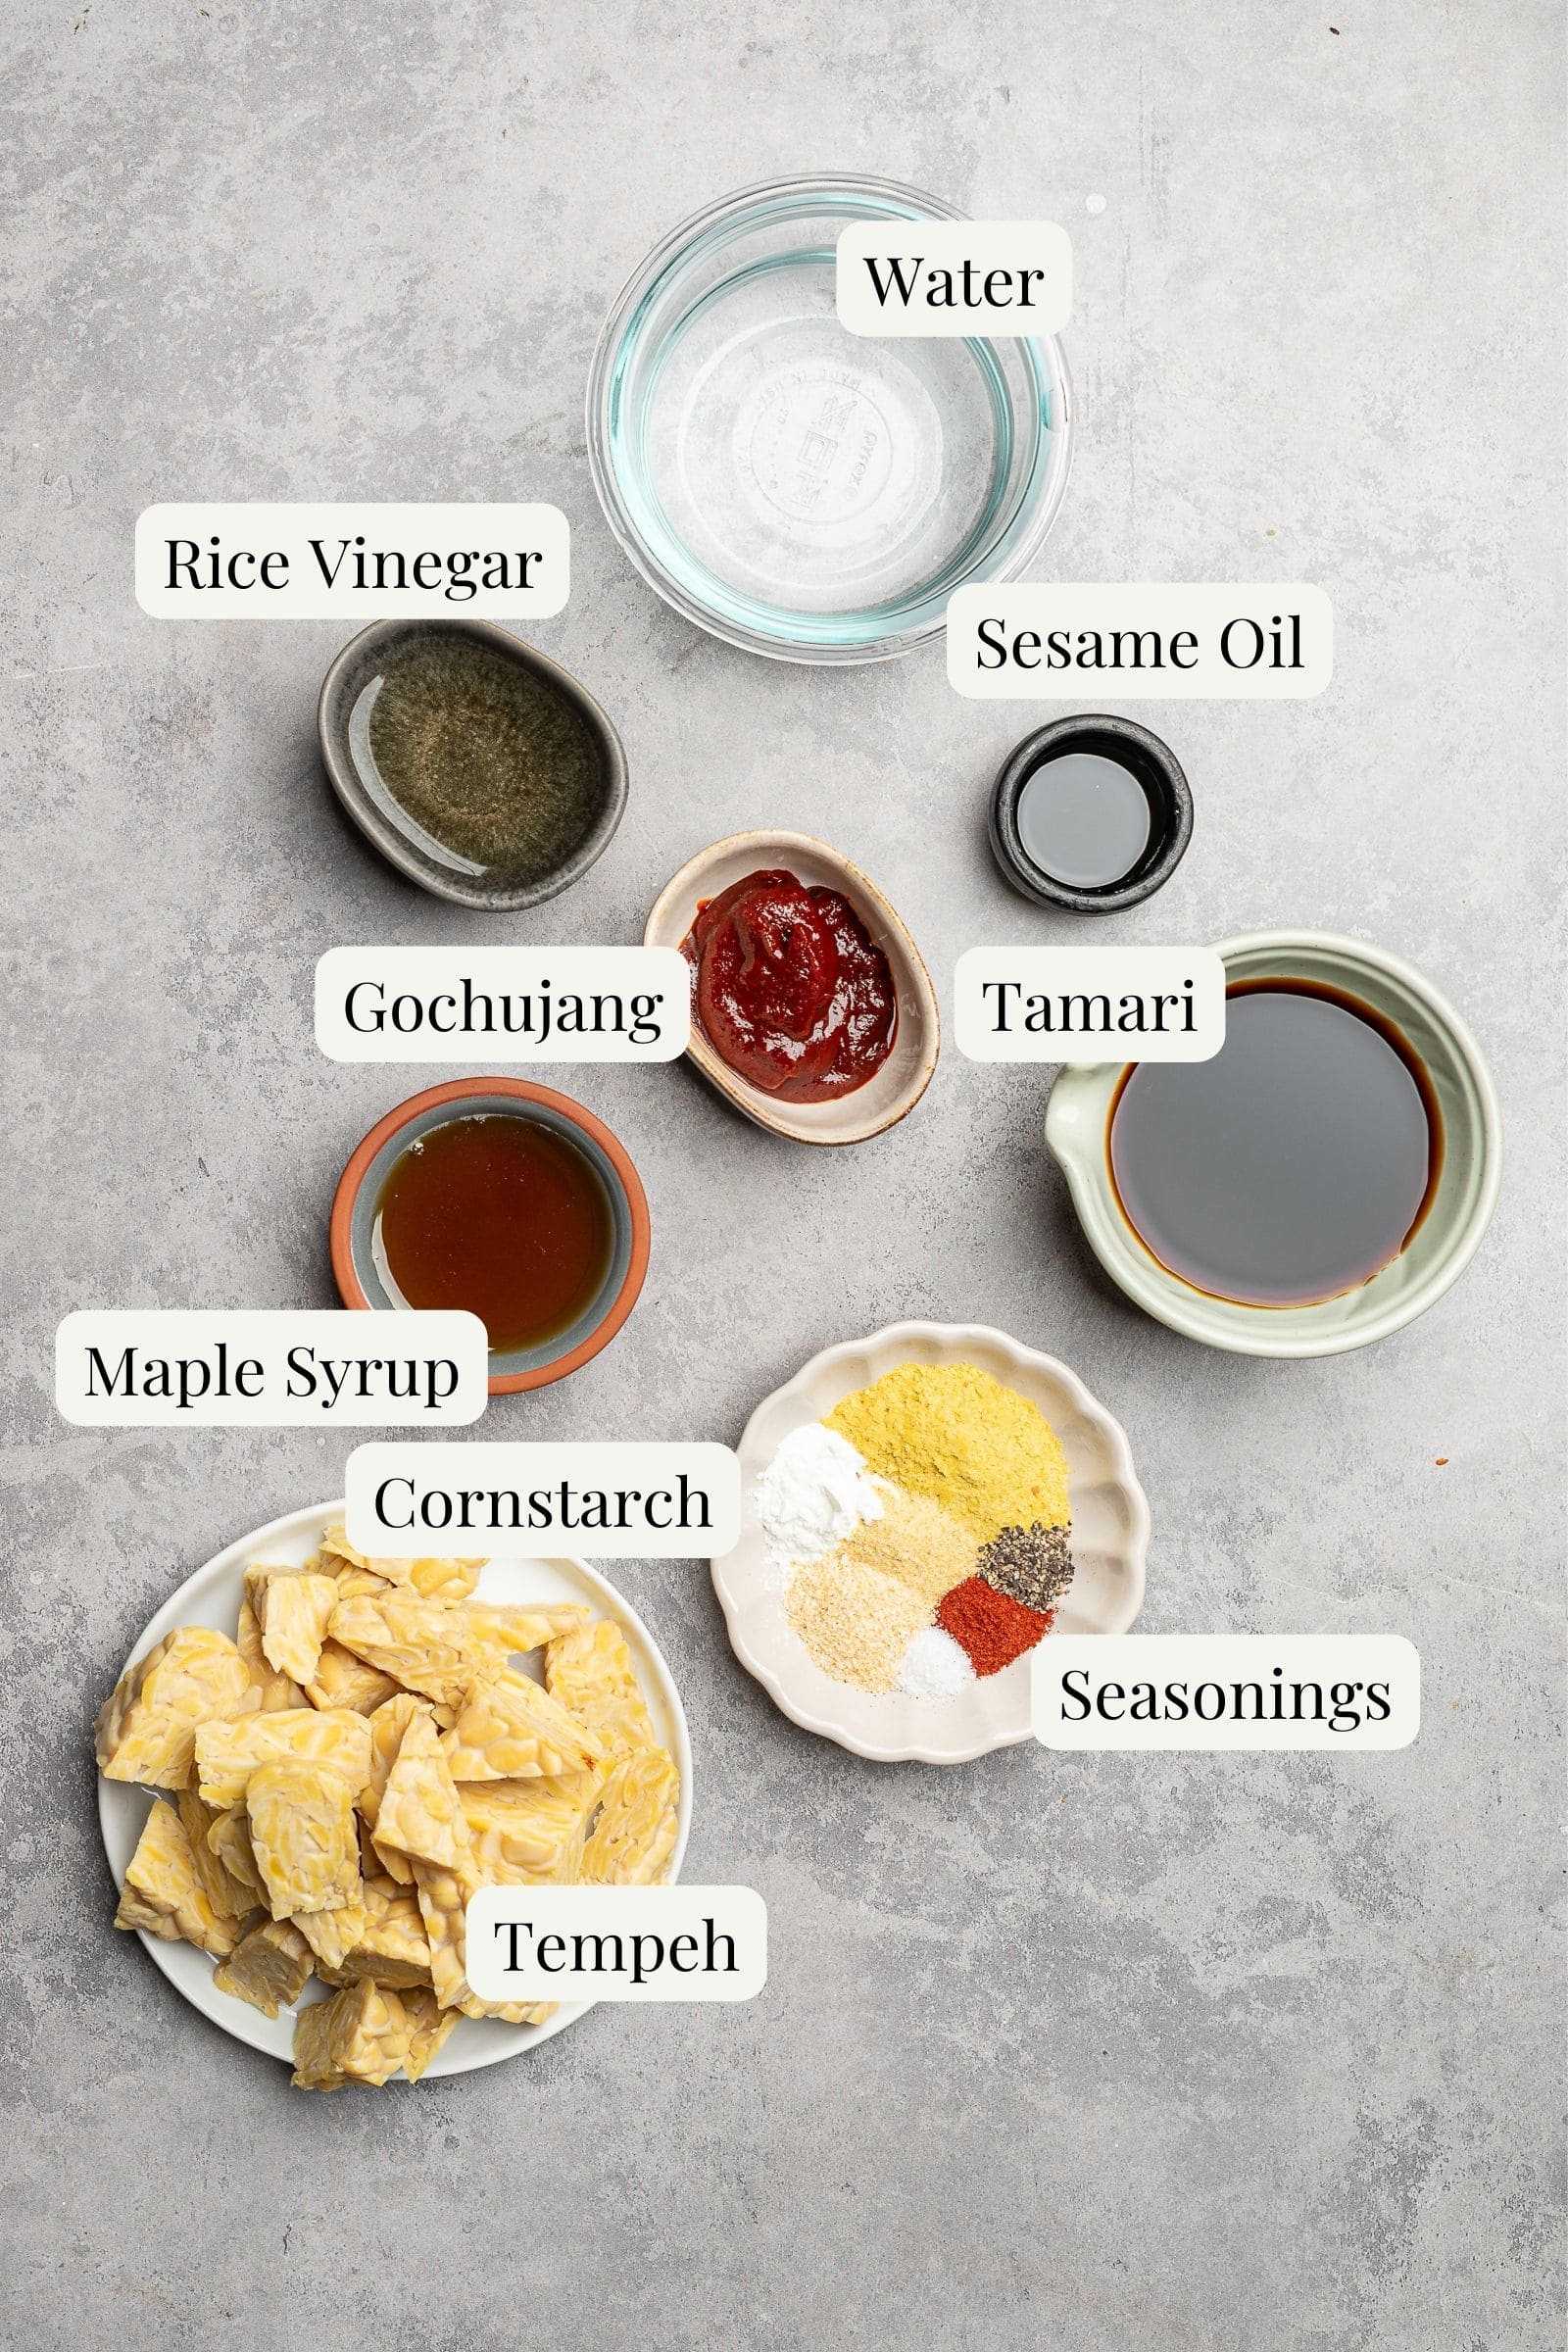 Labeled ingredients for gochujang sauce and crispy tofu.